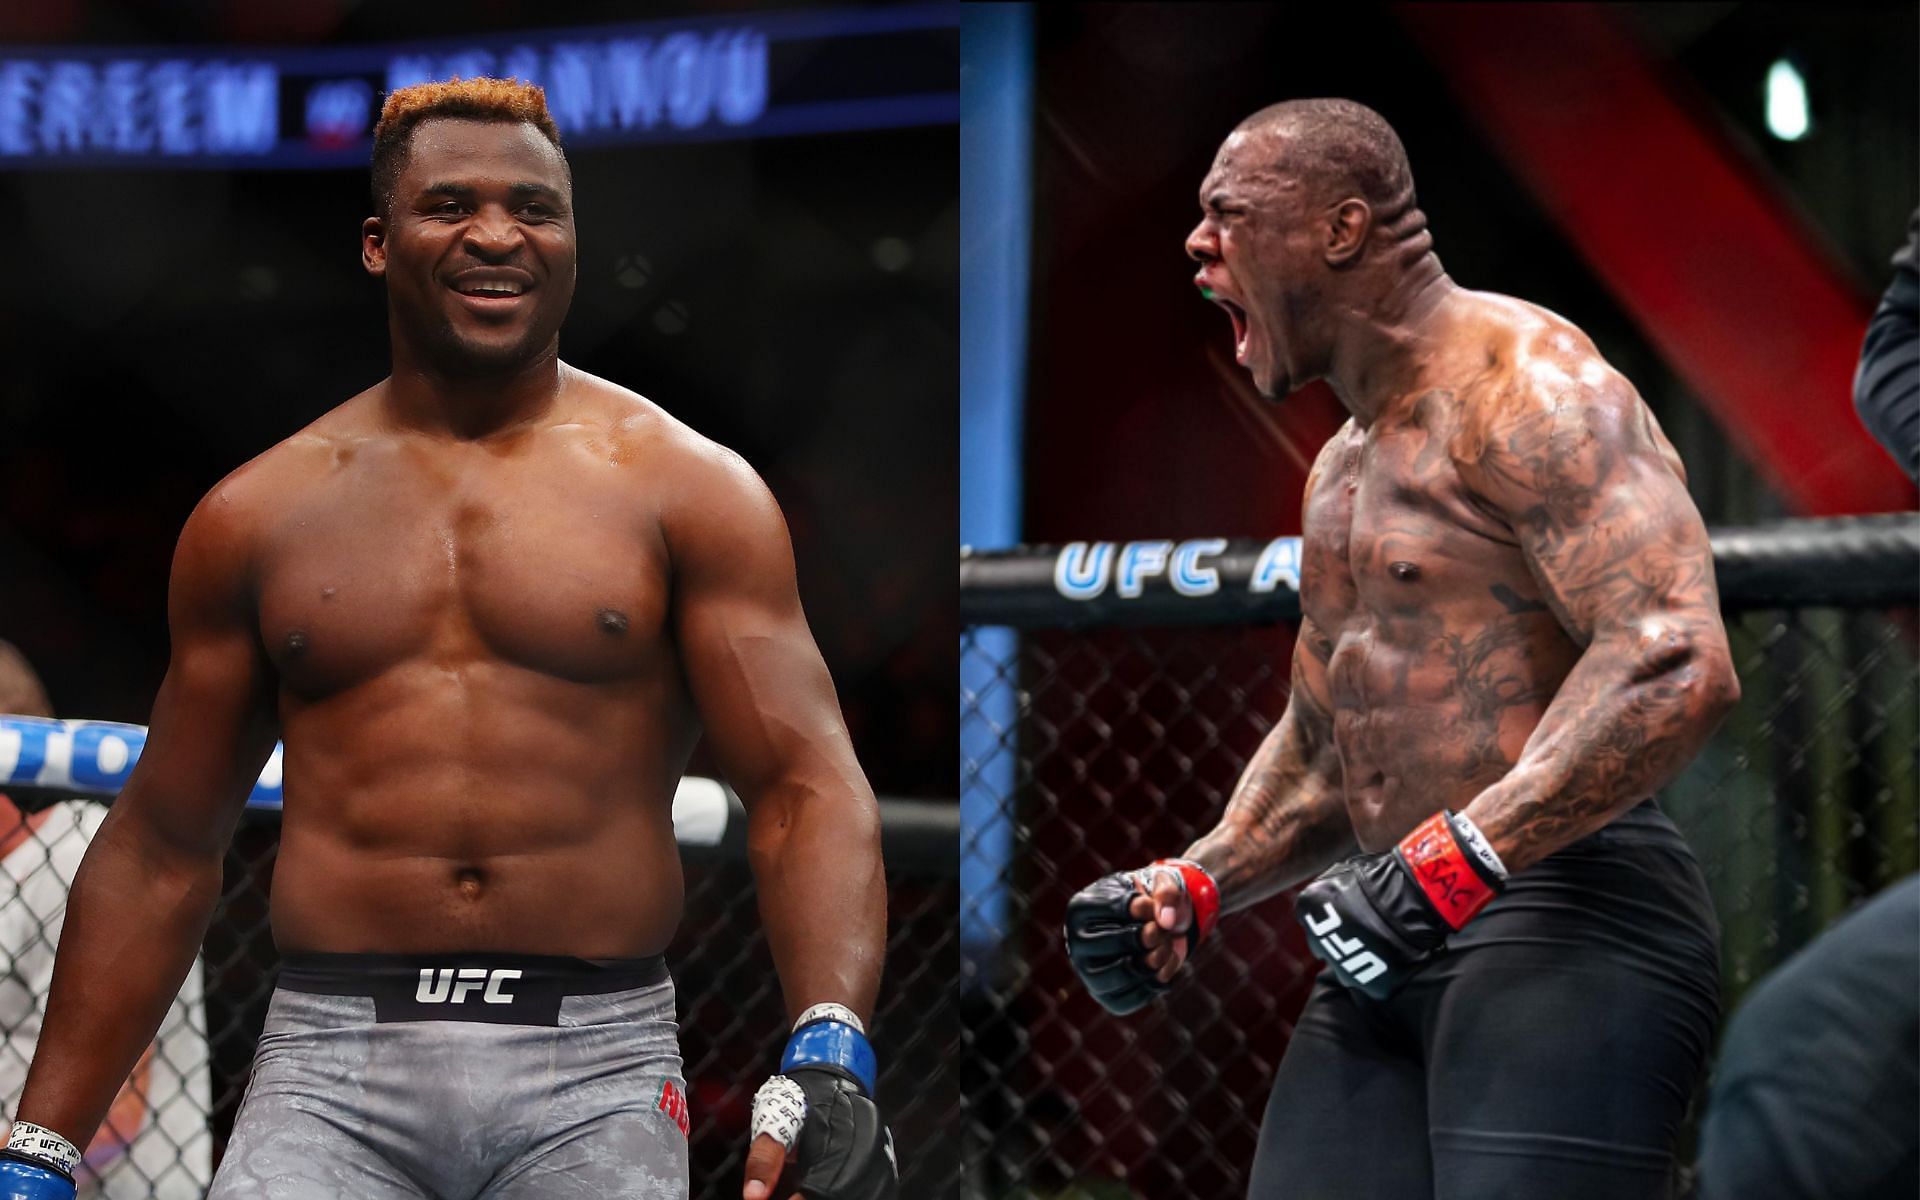 Francis Ngannou Mohammed Usman to the UFC heavyweight division